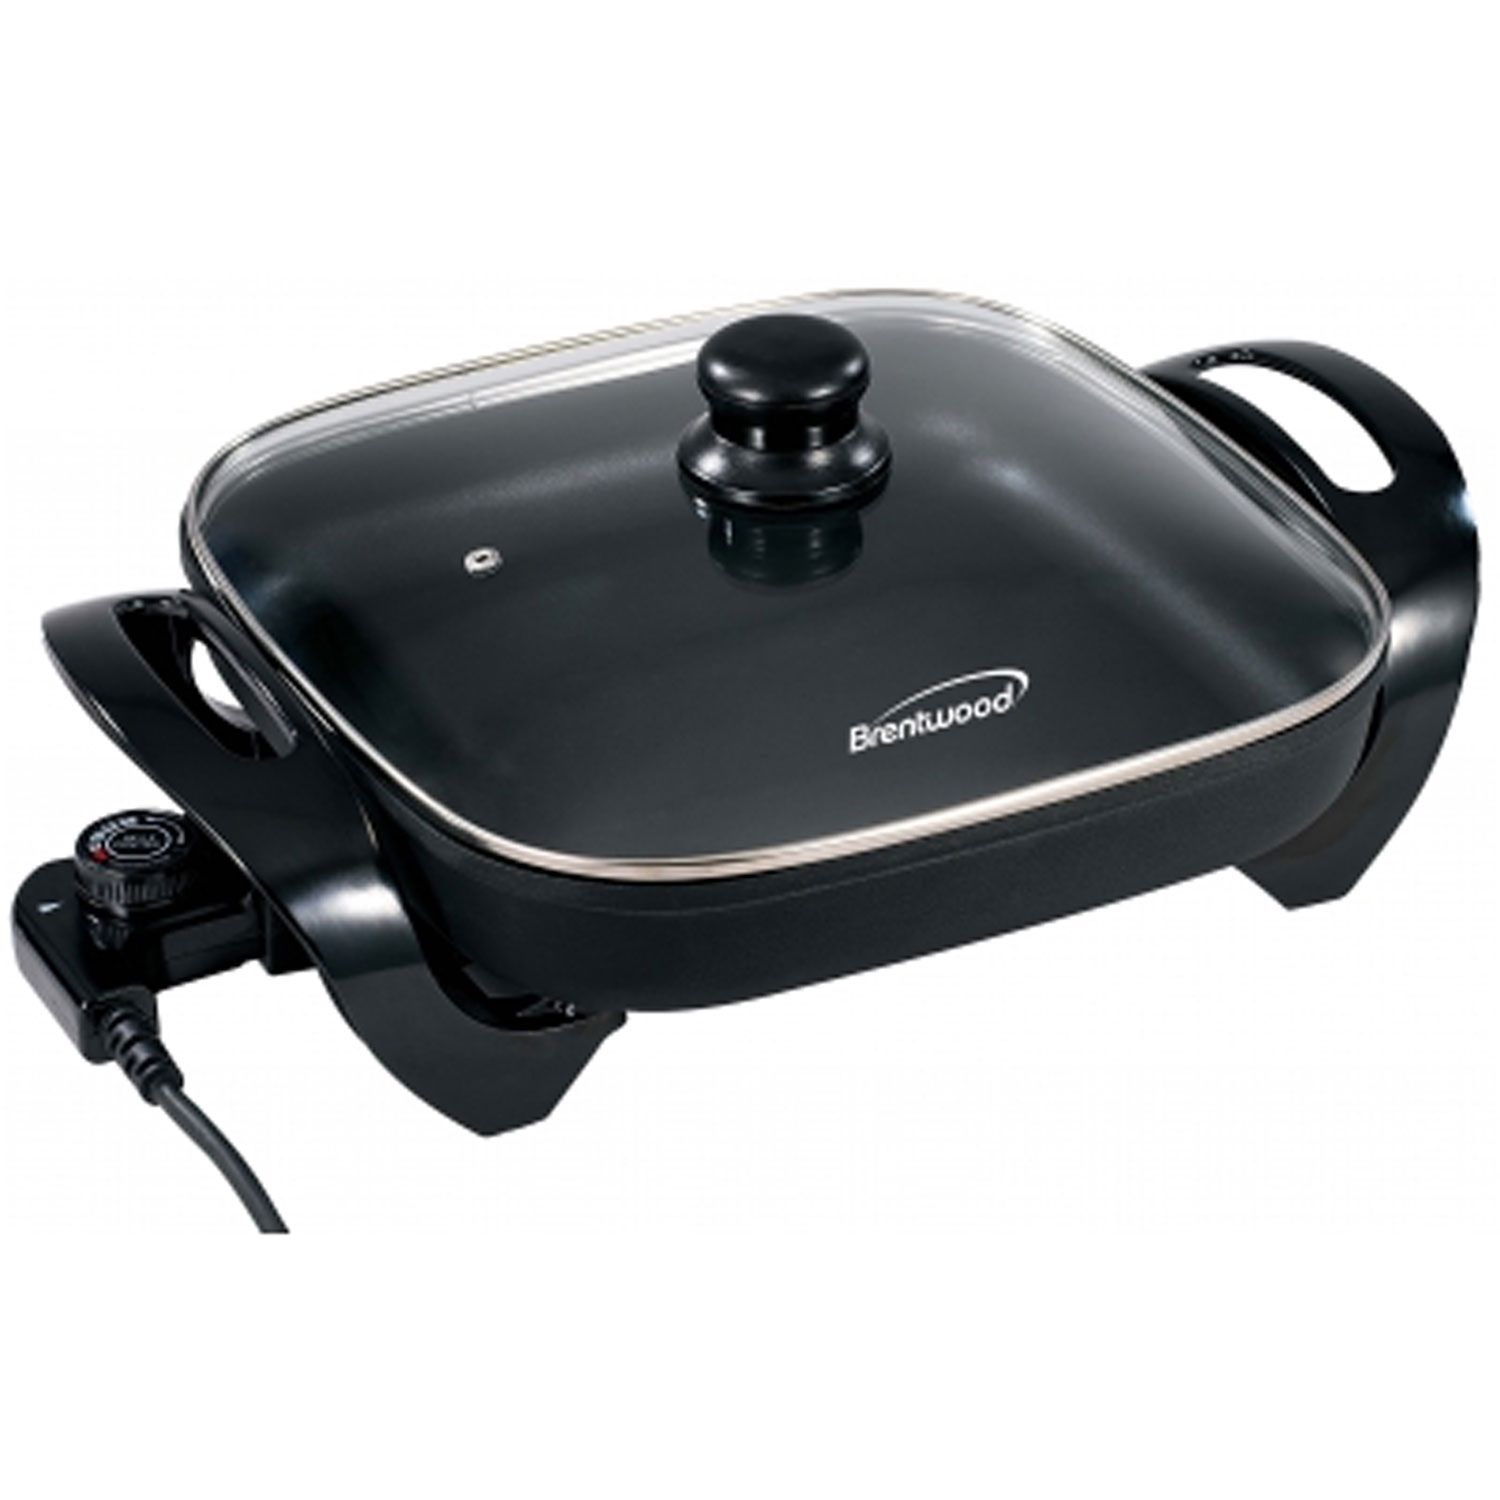 Brentwood TS-605 2-Serving Non-Stick 750w Indoor Electric Grill